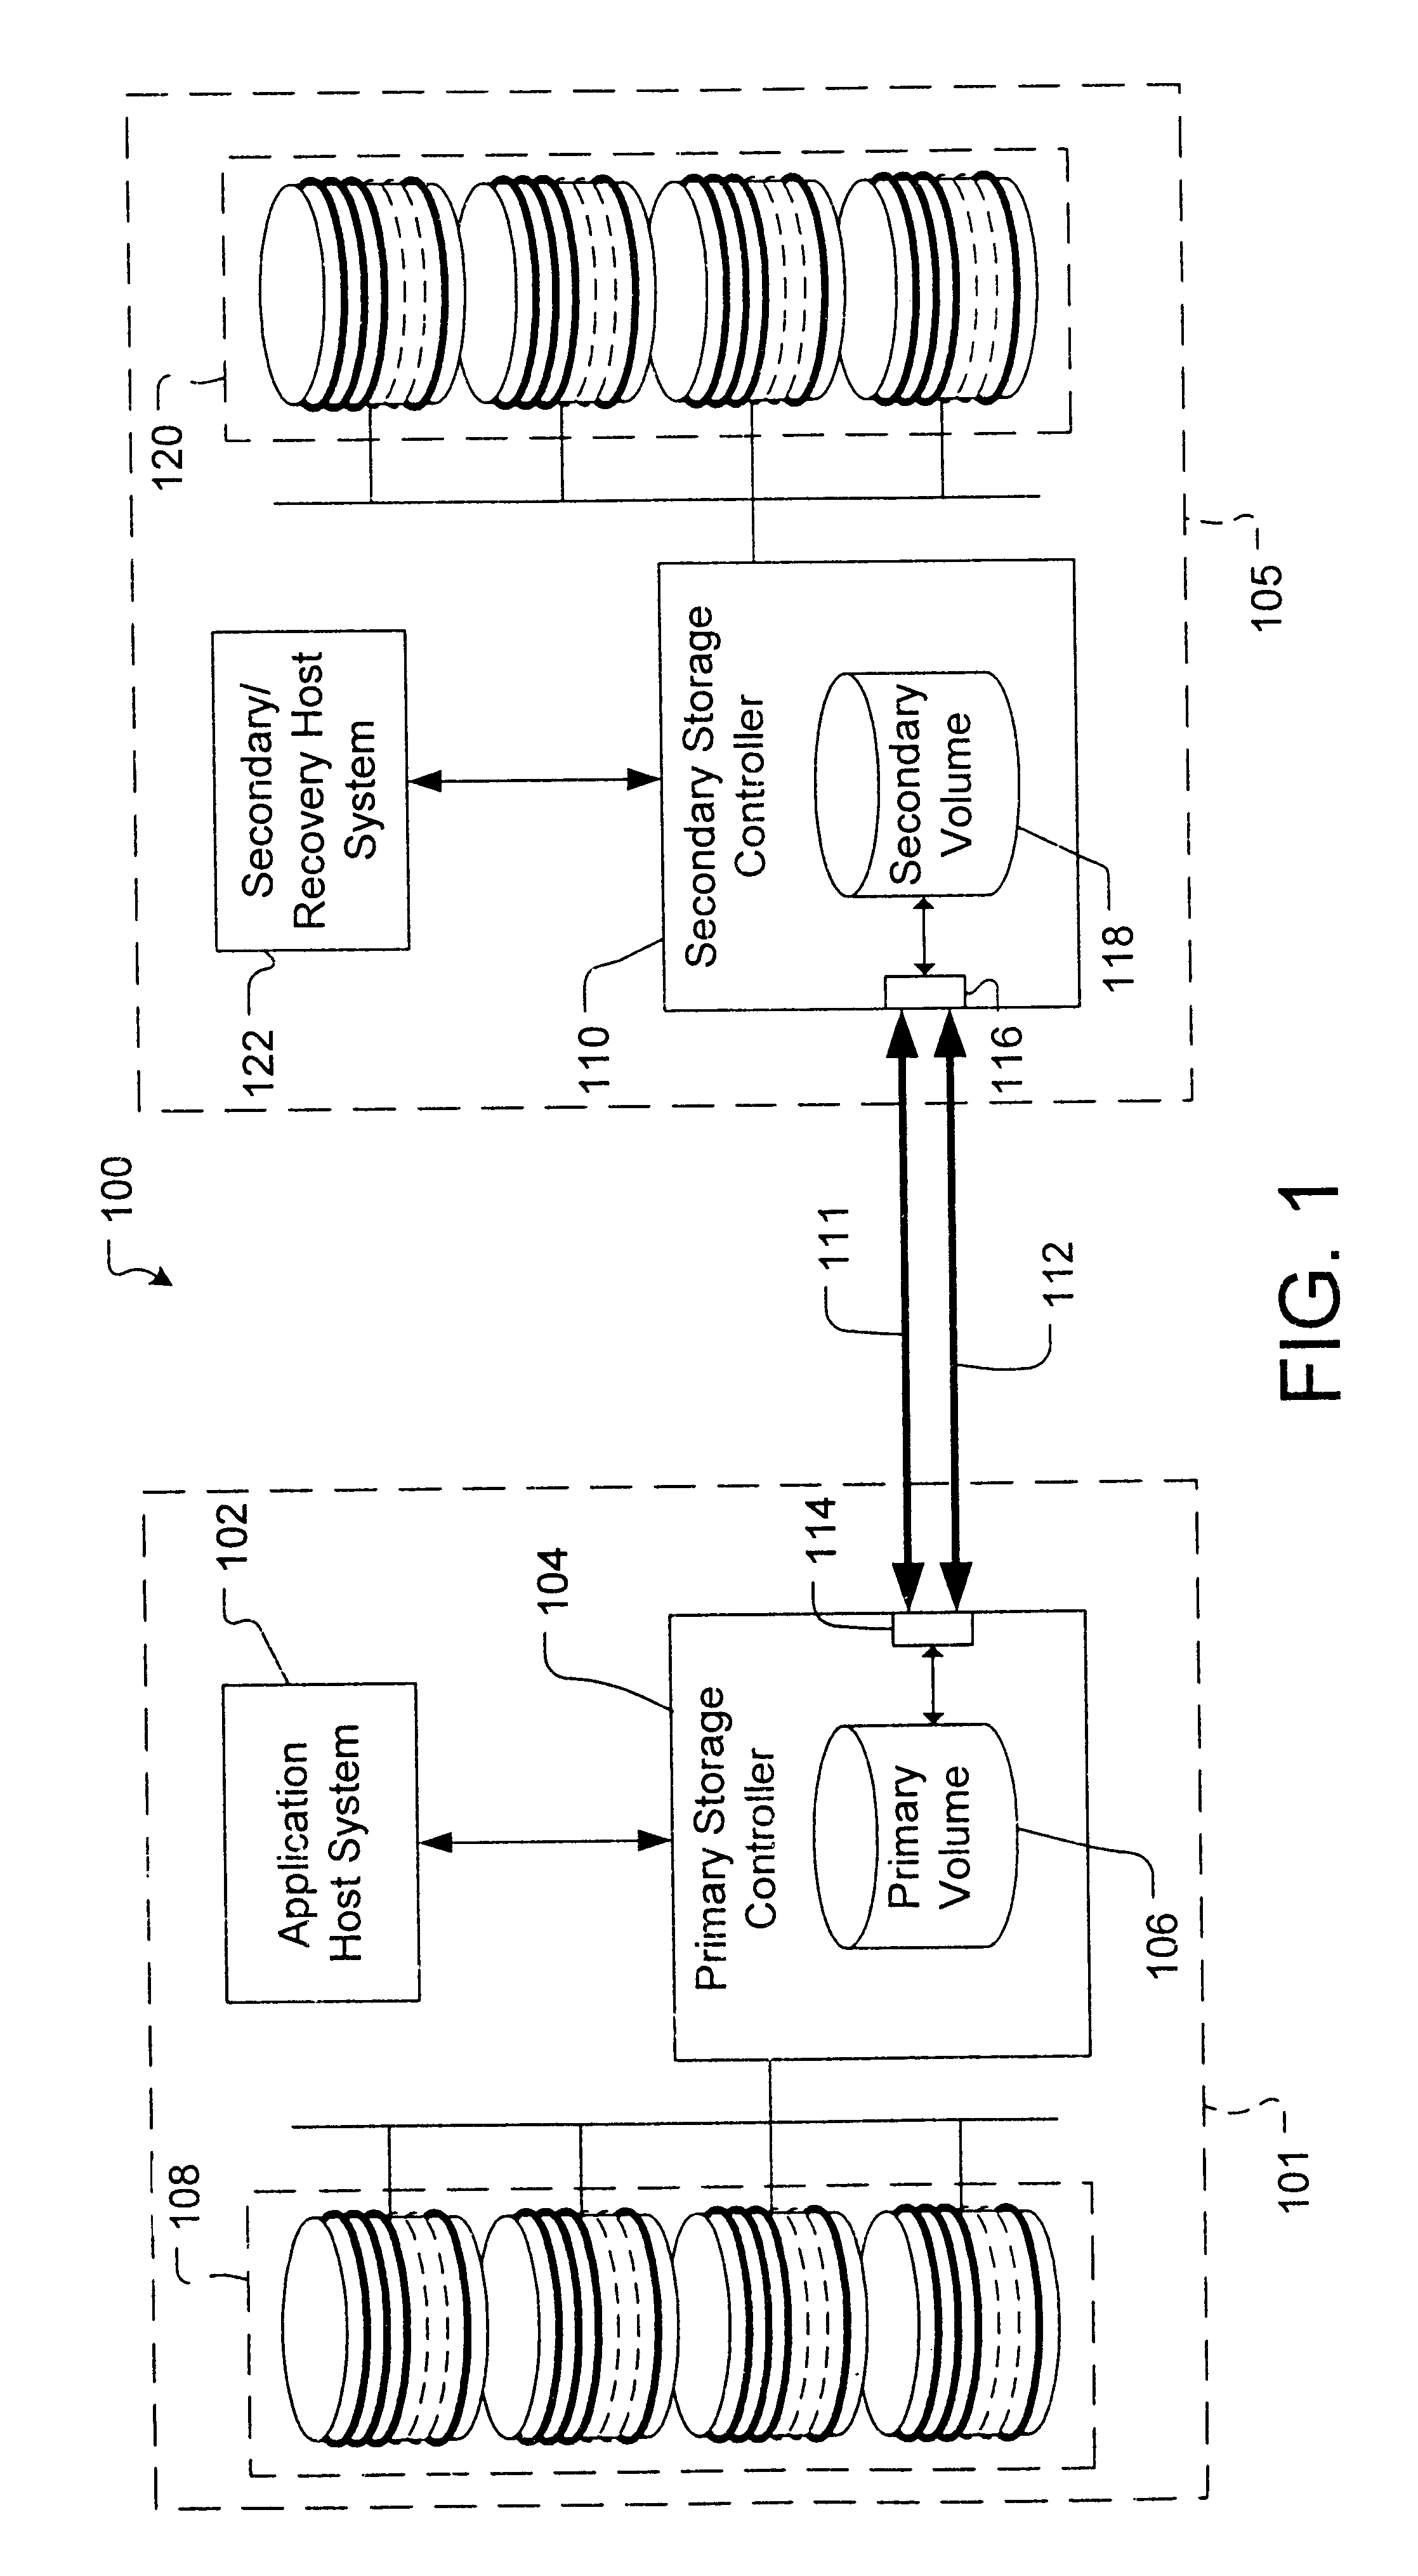 System and method for restoring data from secondary volume to primary volume in a data storage system